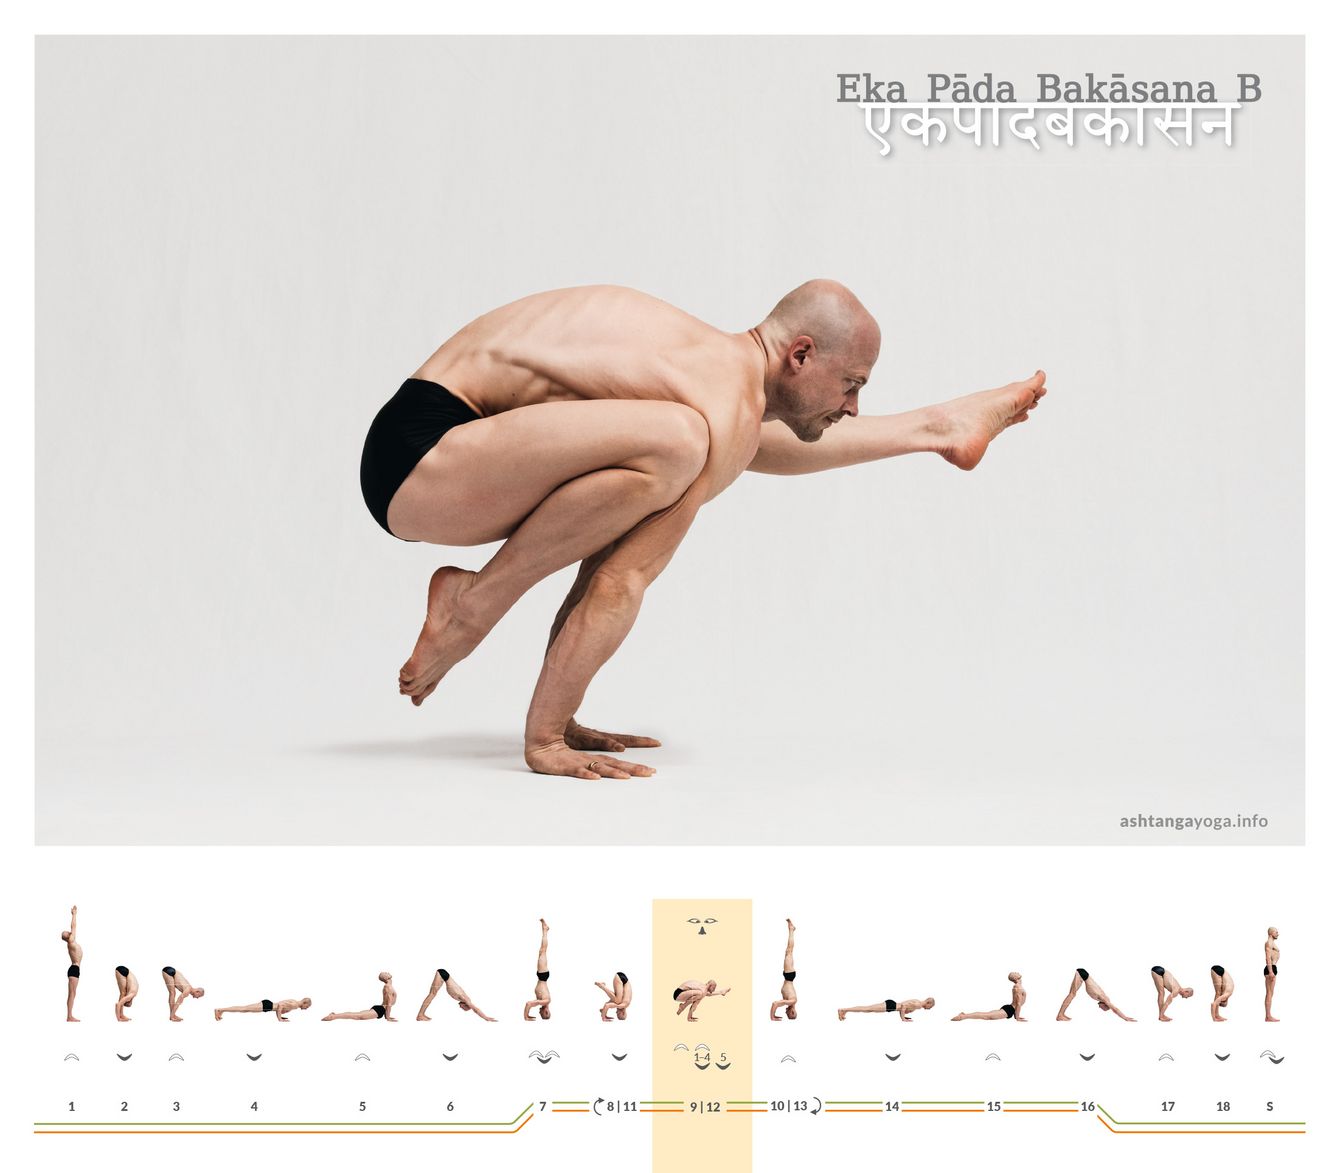 Eka Pada Bakasana, or One-Legged Crow Pose, is, in variation B, an advanced yoga pose balancing on arms. One knee is supported on an elbow and the other leg extended forward.